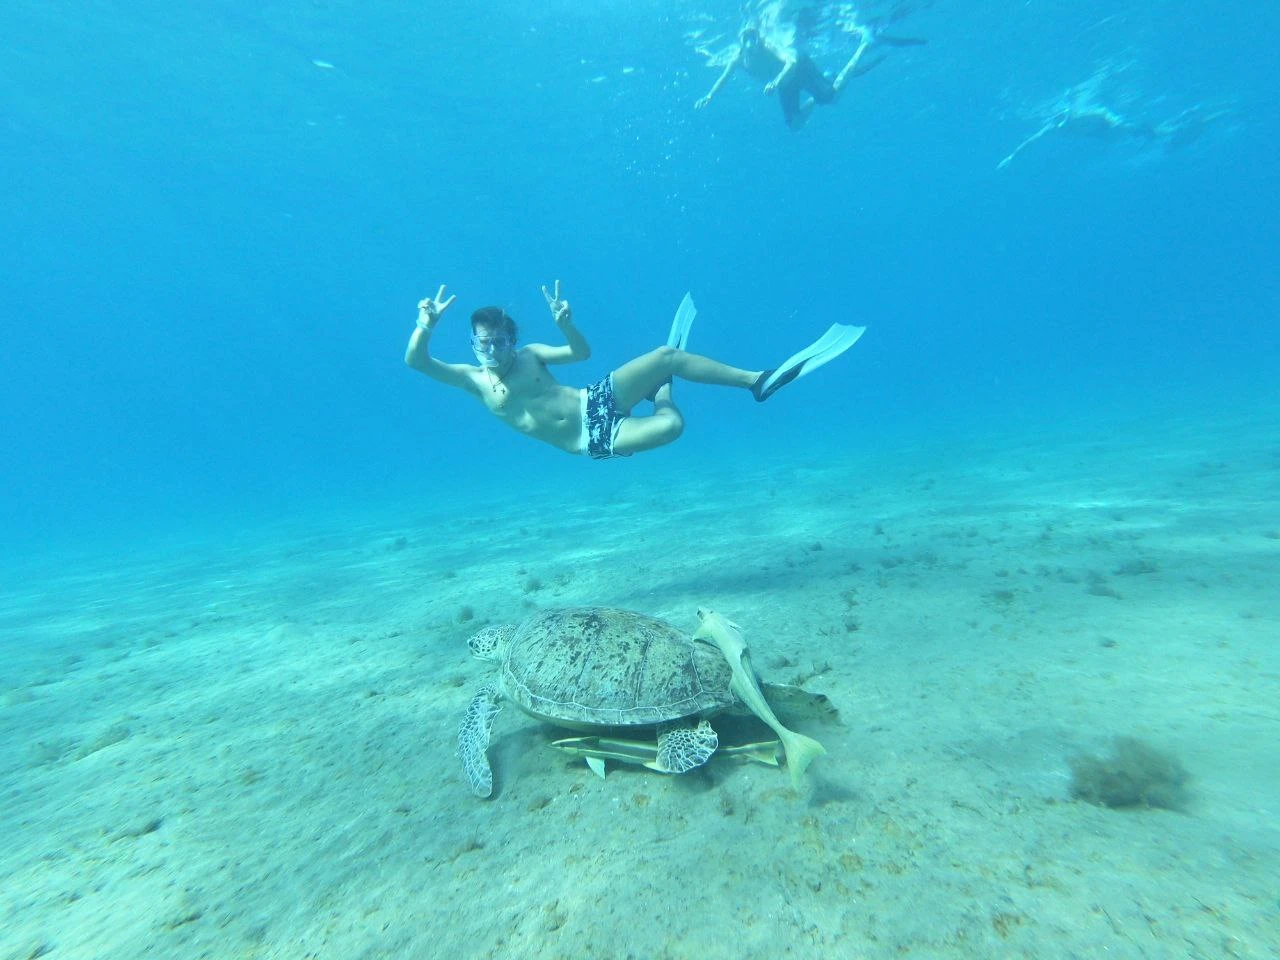 Underwater photo of a man in swimming trunks giving a peace sign with both hands while floating above a sea turtle on the ocean floor.